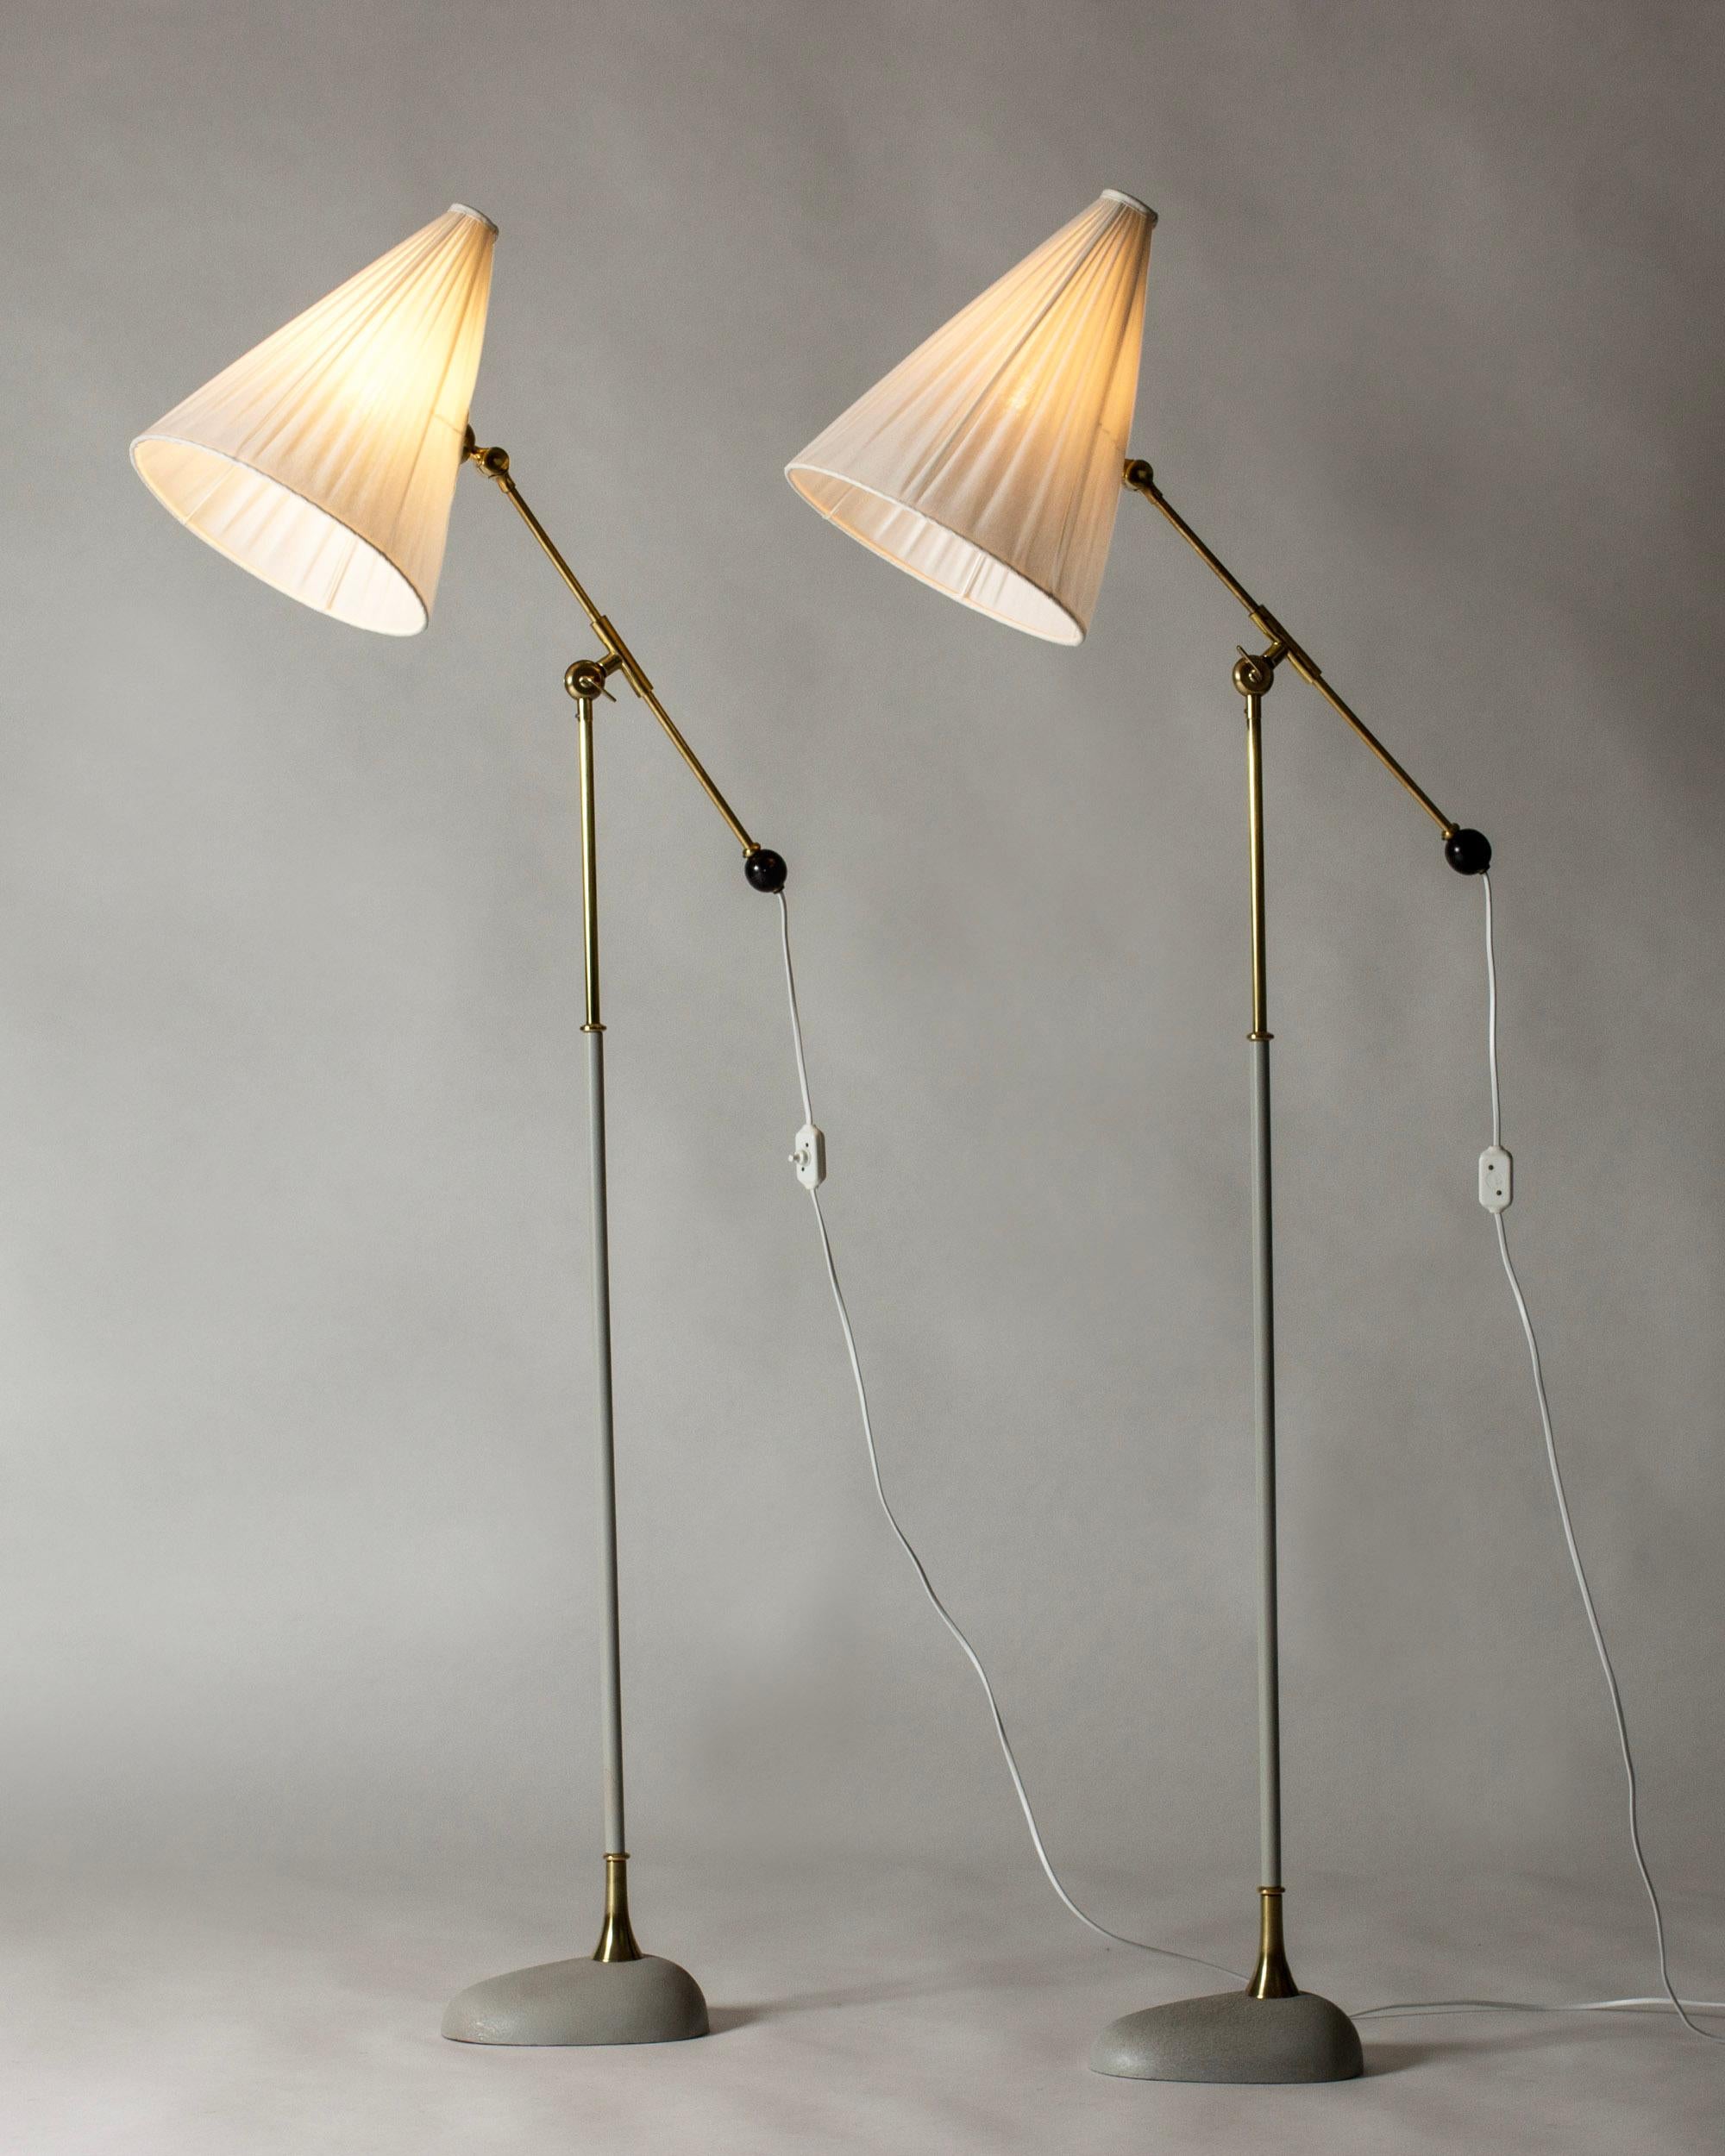 Pair of very cool floor lamps by Einar Bäckström, made from lacquered metal and brass. Chunky, oval bases lacquered light grey. Adjustable height and angle of the shades, cute ball shaped details, large pleated shades.